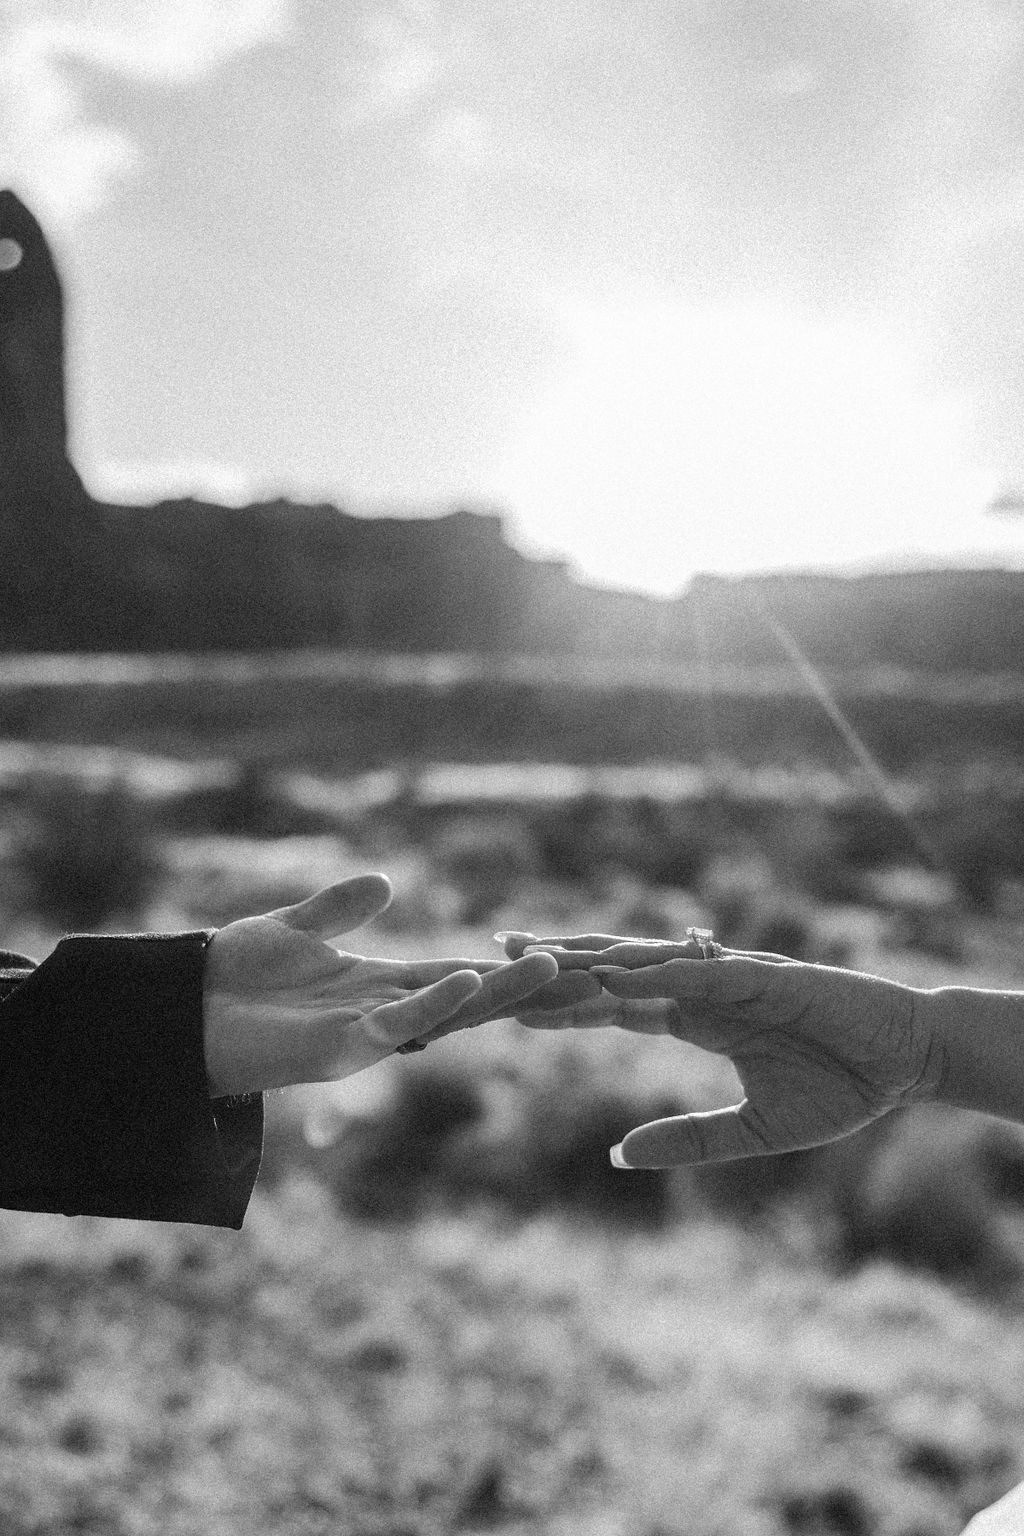 Two hands reaching towards each other against a blurred desert landscape at Arches National Park